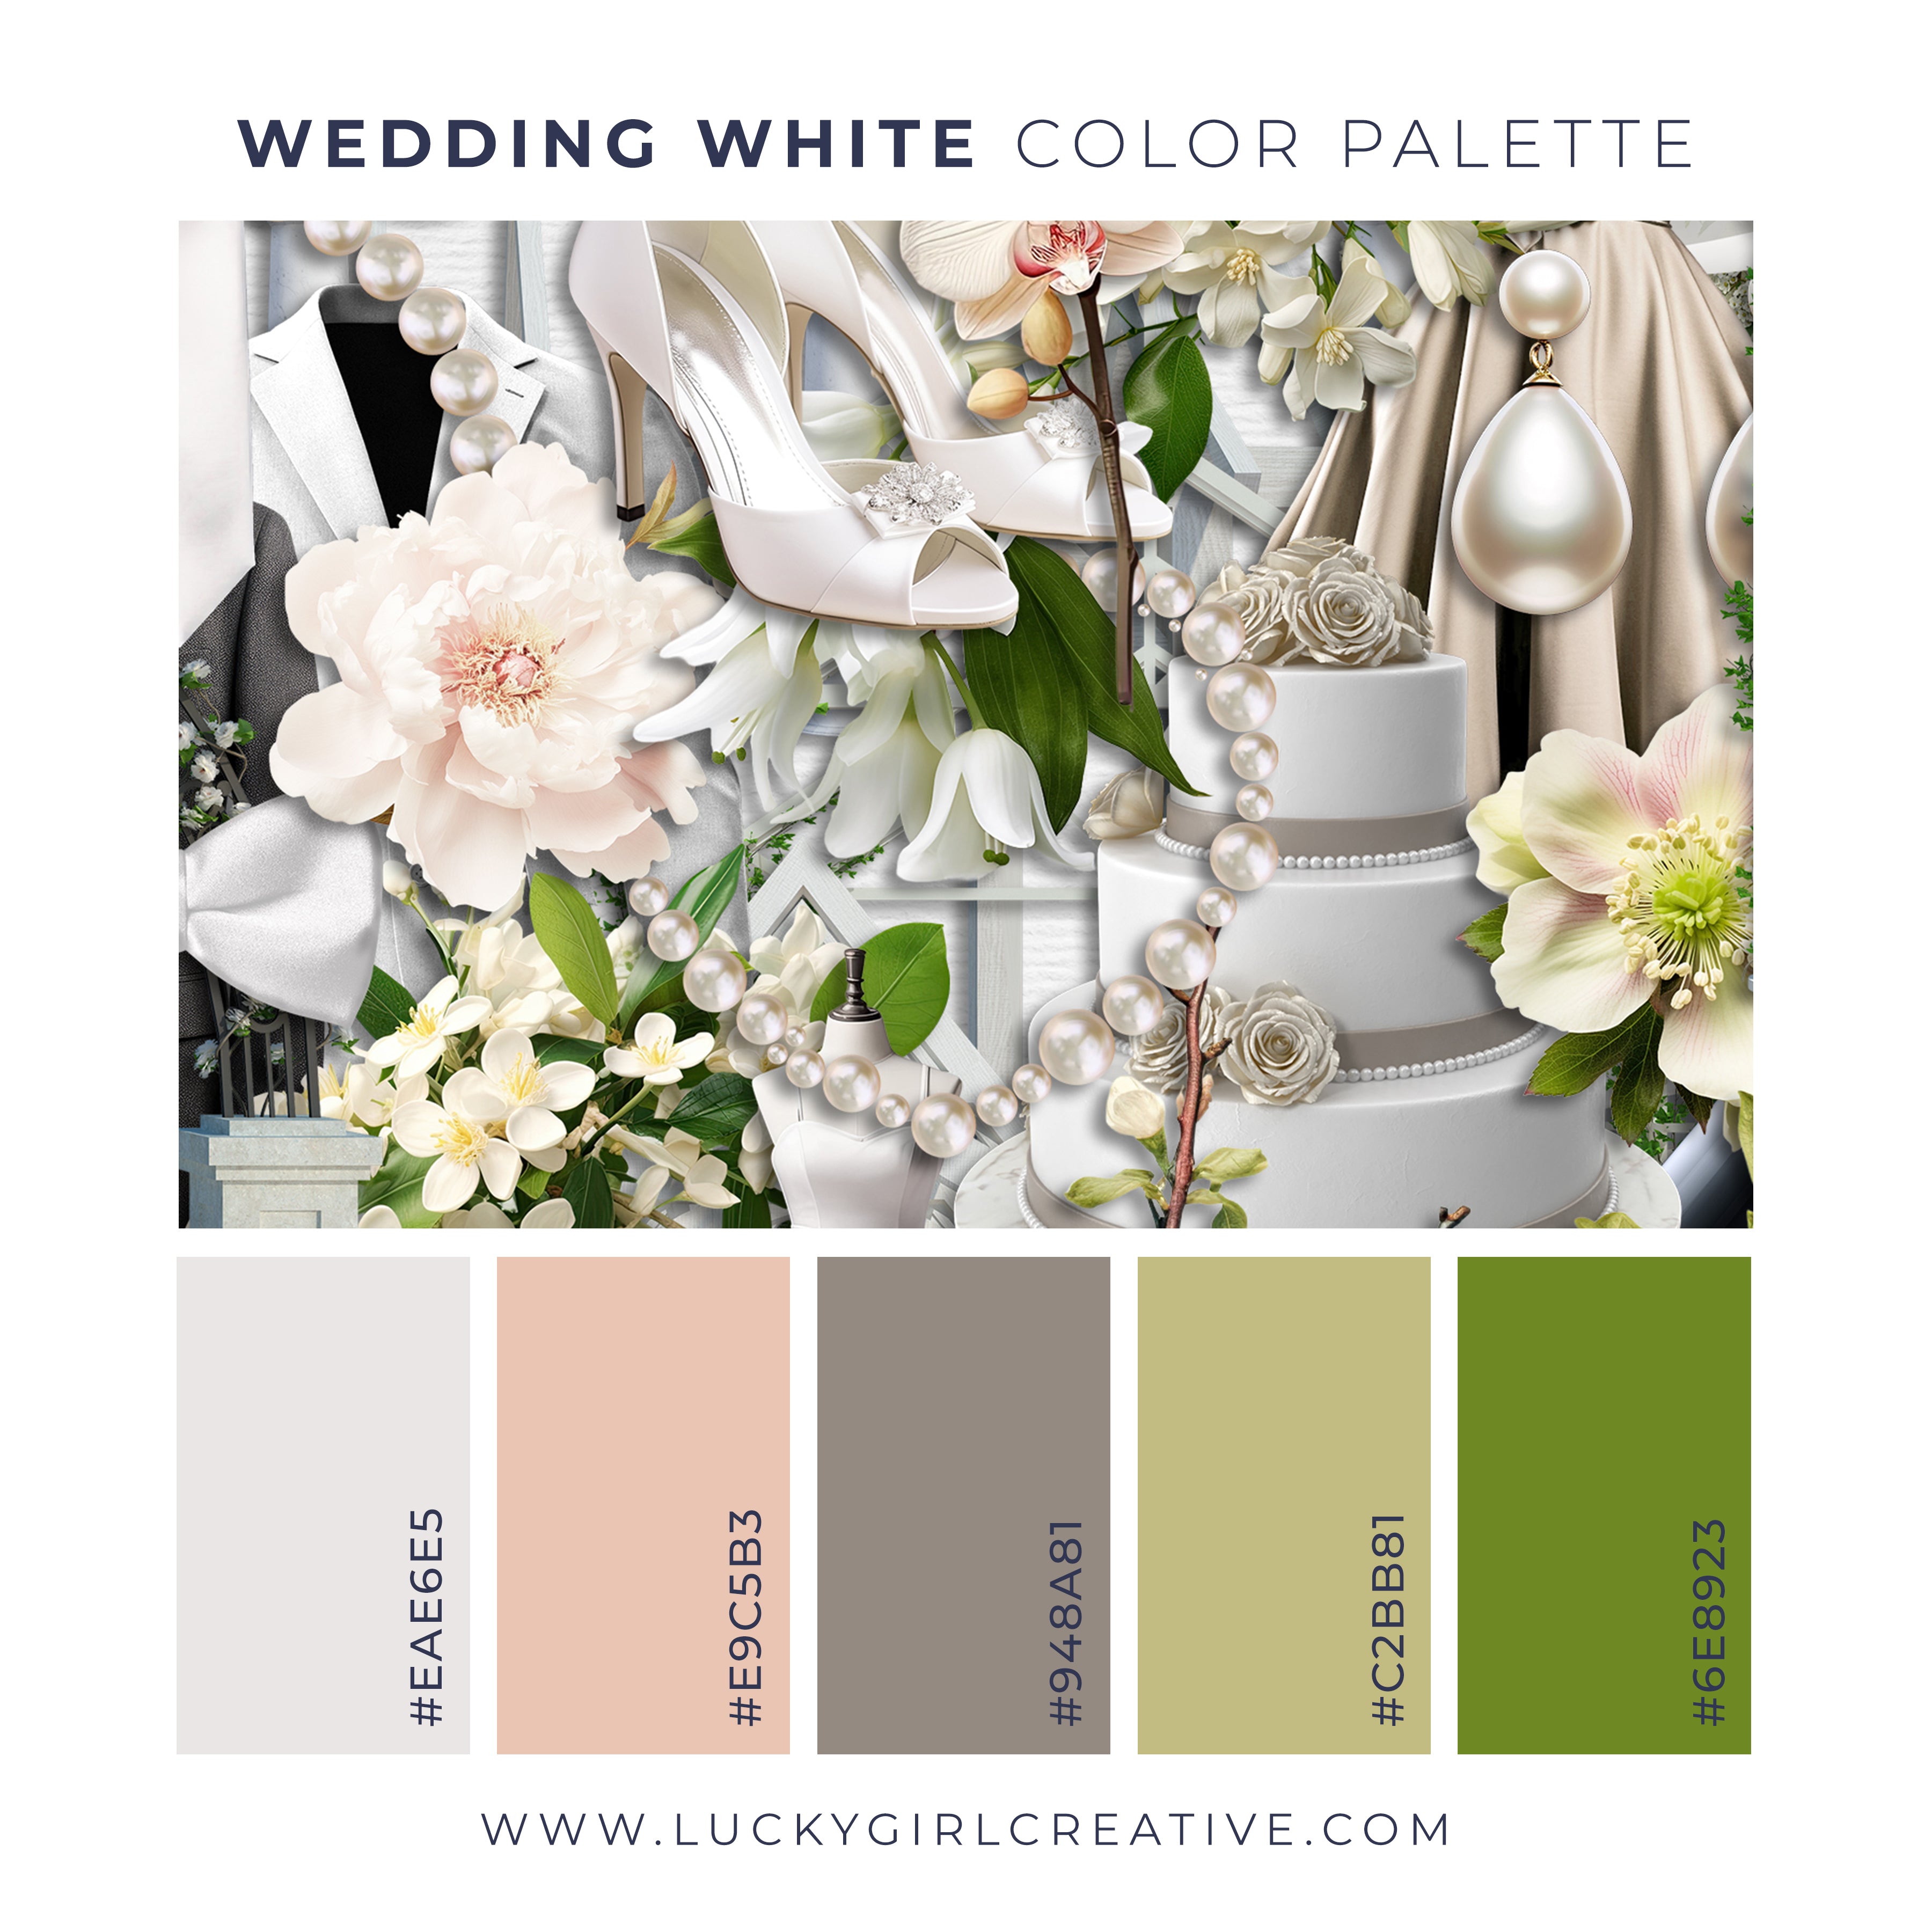 Finding Your Color Palette